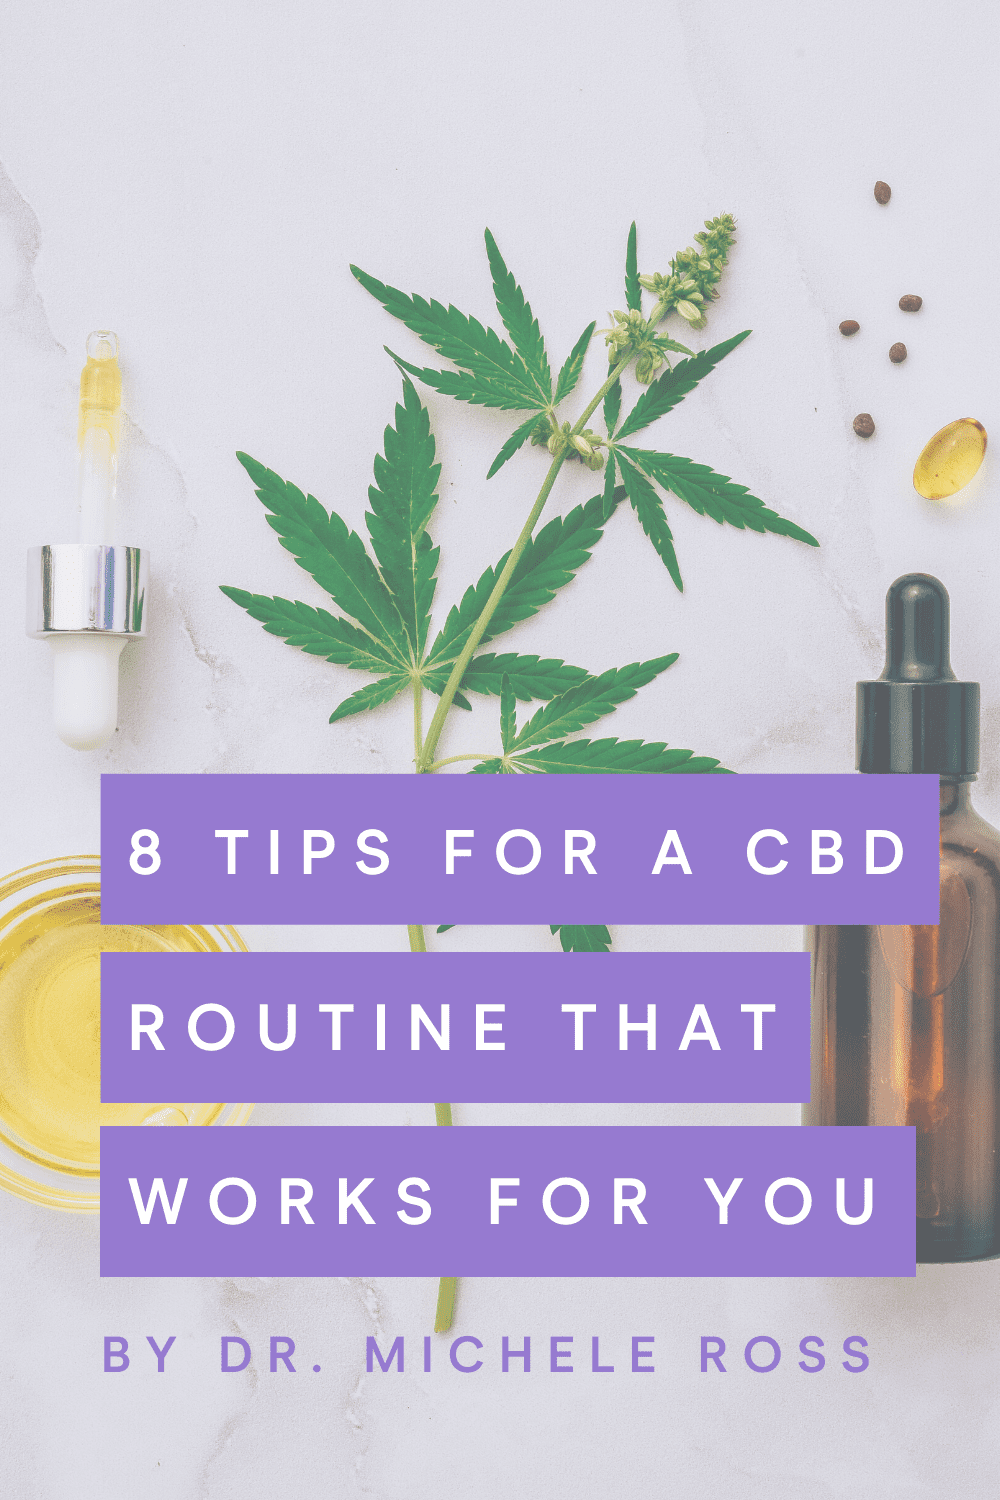 8 Tips For a CBD Routine That Works For You in 2022